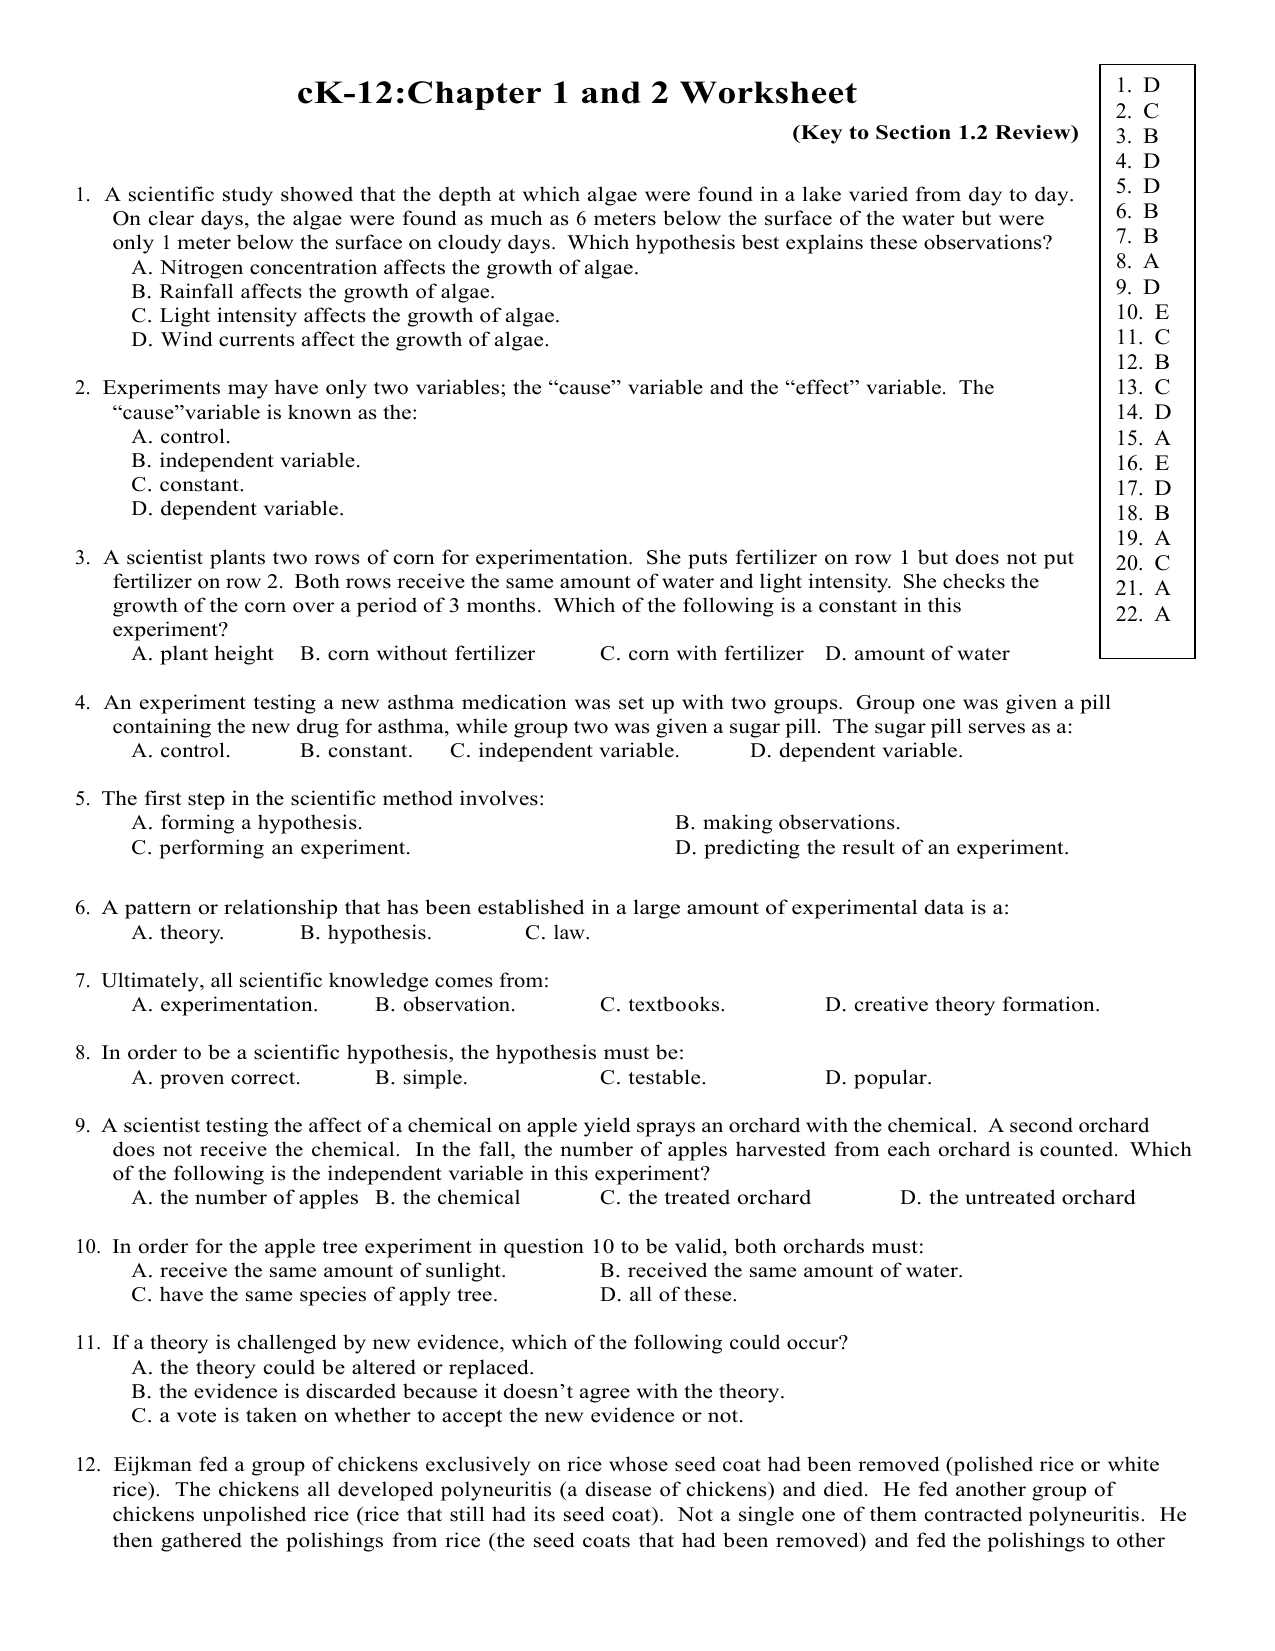 ck-12-chapter-1-and-2-worksheet